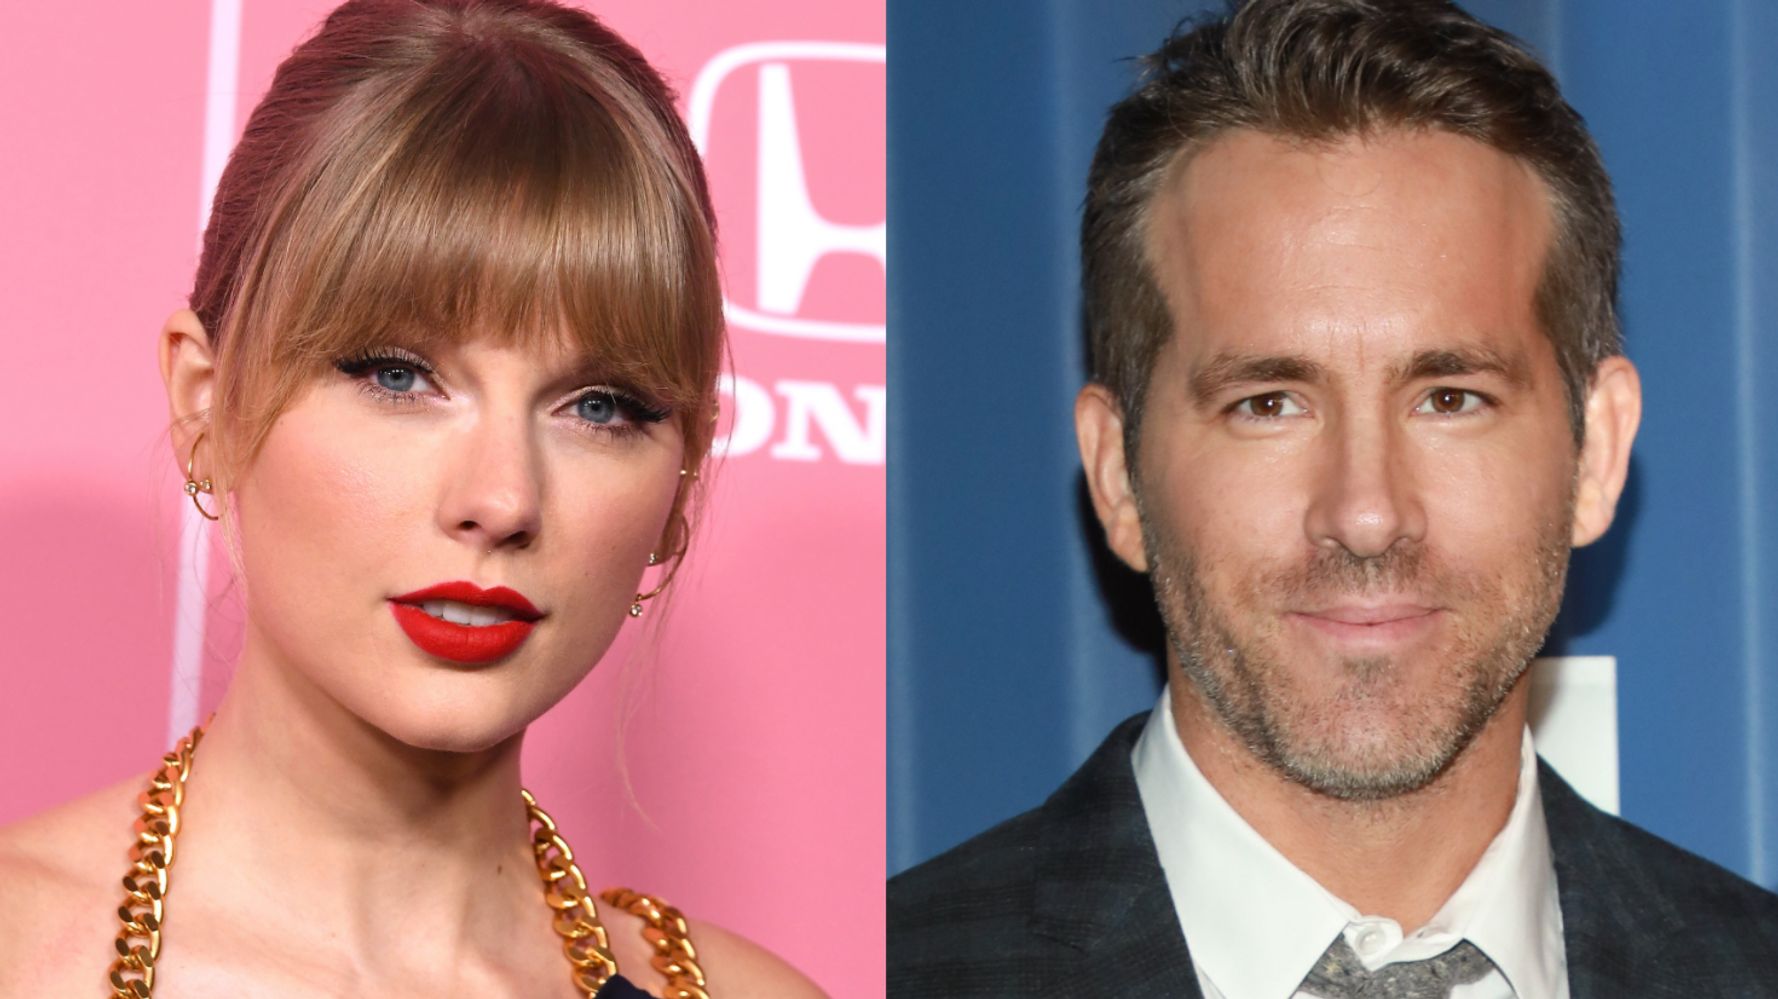 Taylor Swift Teams Up With Ryan Reynolds To Debut New Version Of 'Love Story'